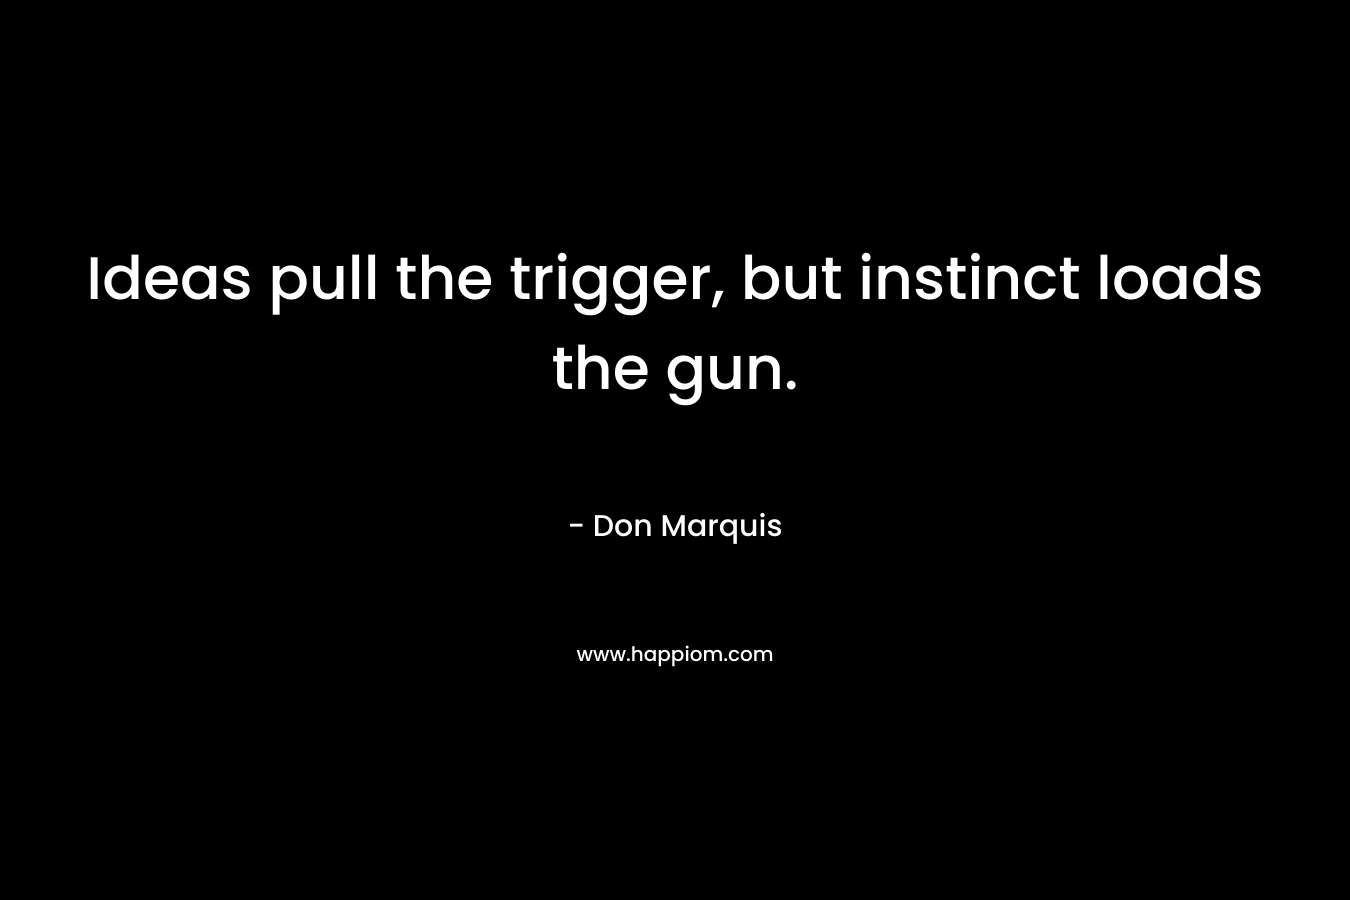 Ideas pull the trigger, but instinct loads the gun. – Don Marquis